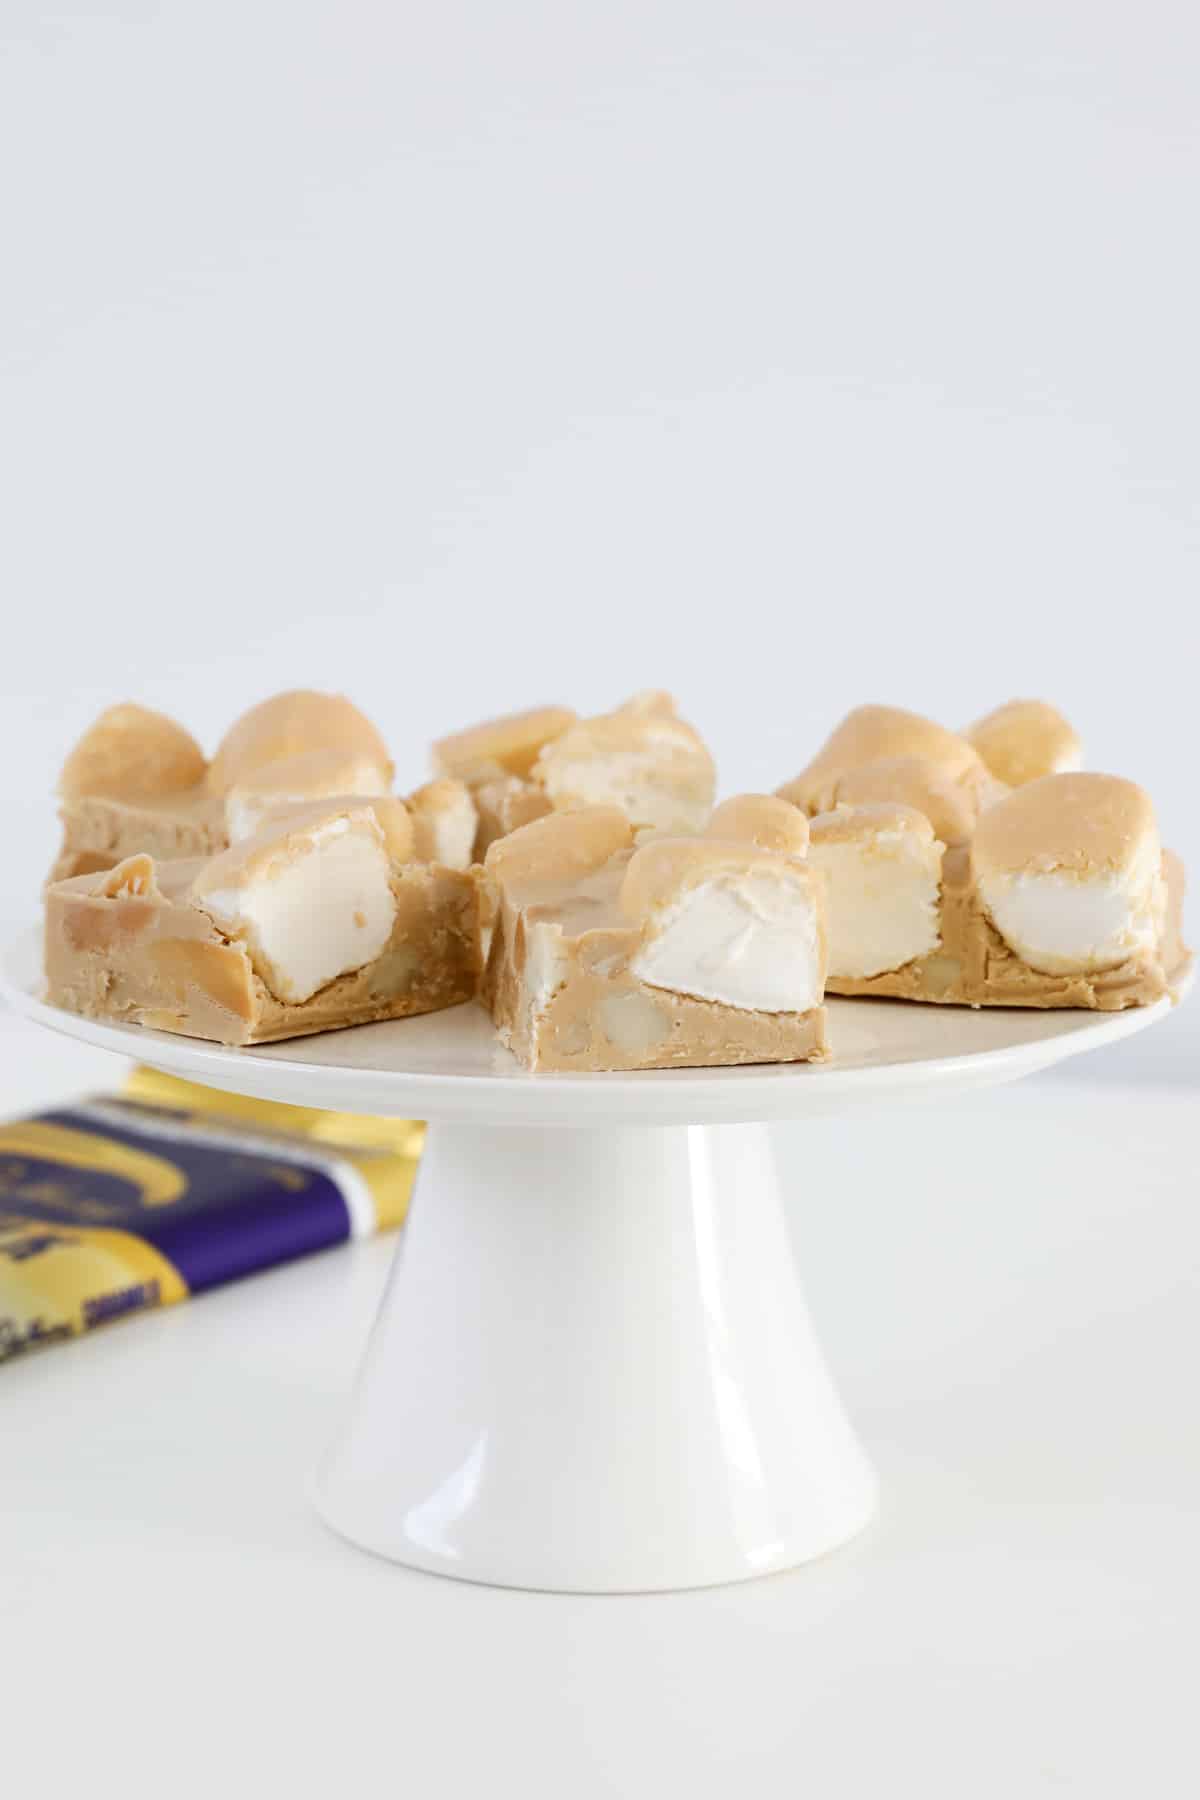 Pieces of caramel and white marshmallow rocky road on a white cake stand.